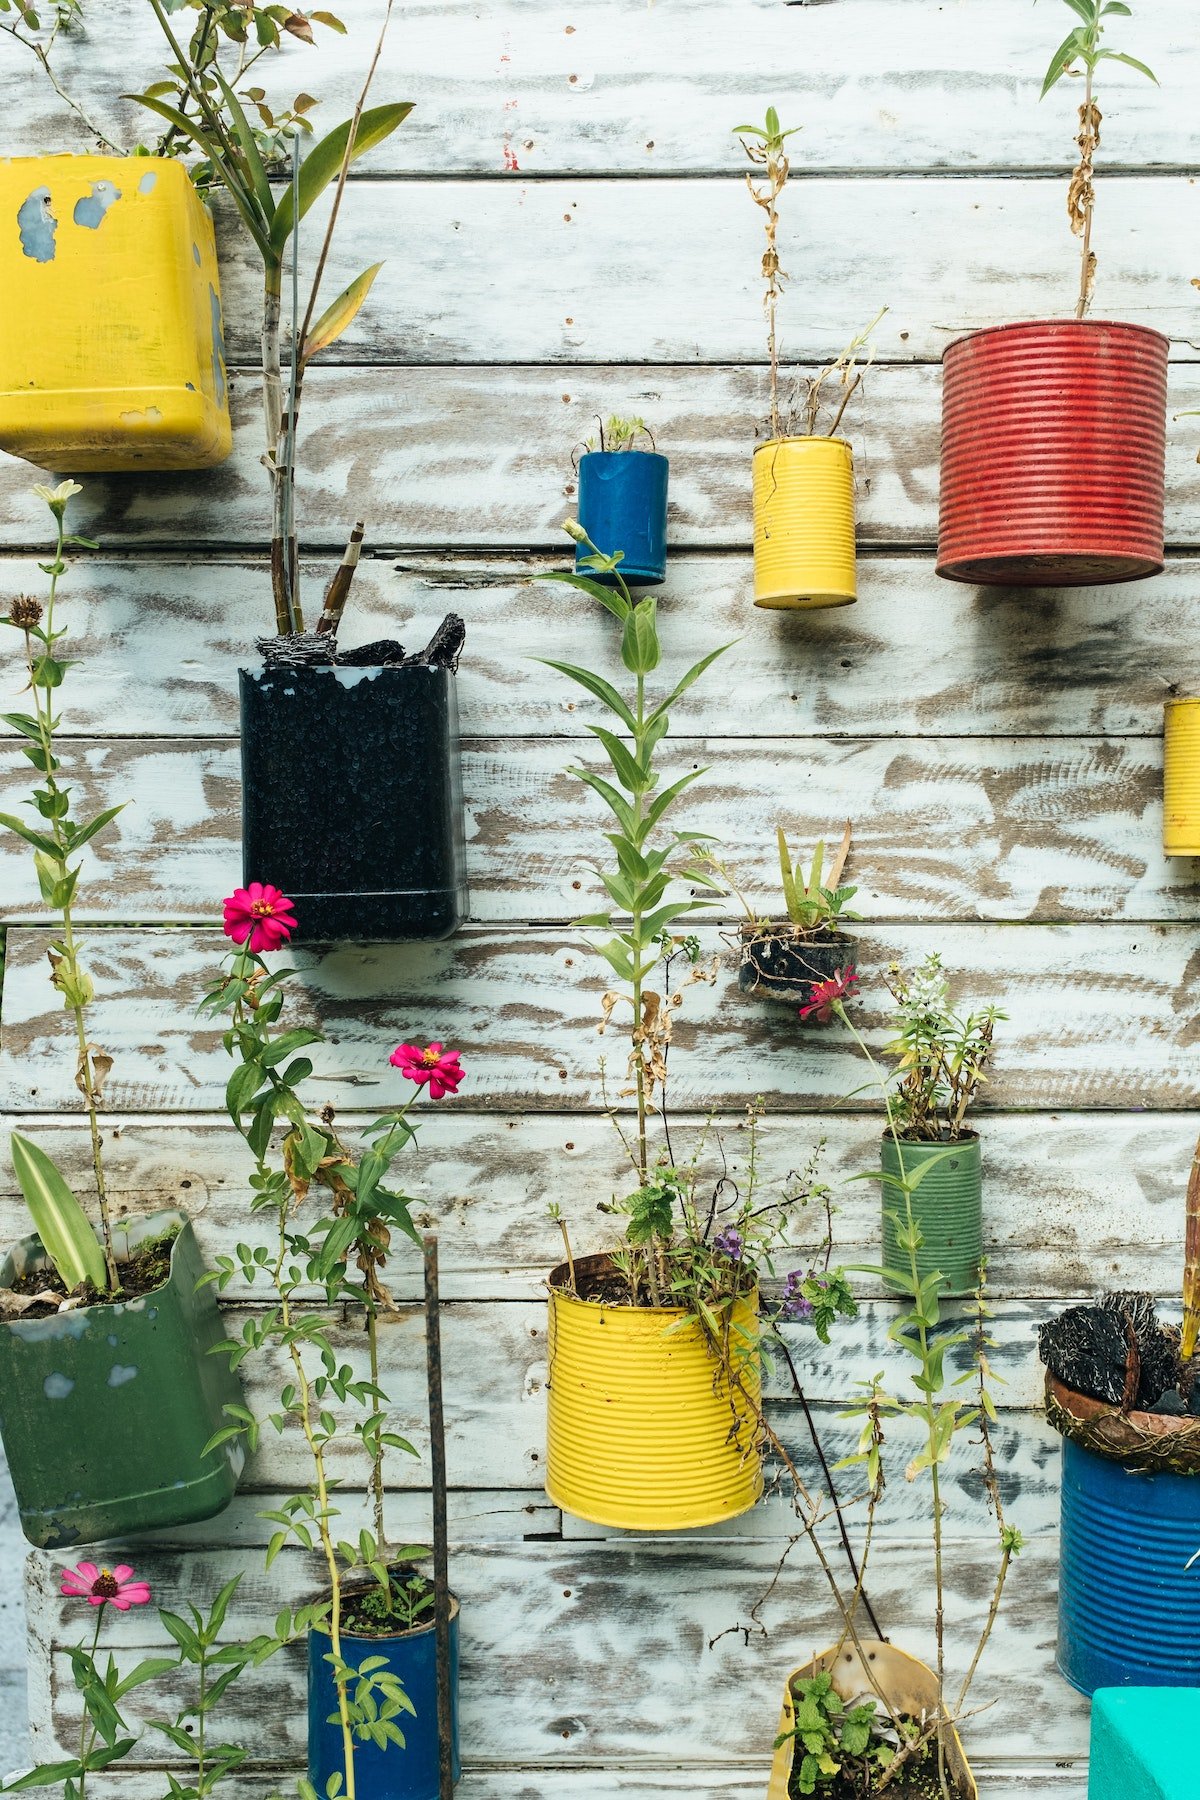 Sustainable gardening tips and ideas | Reuse, recycle and upcycle